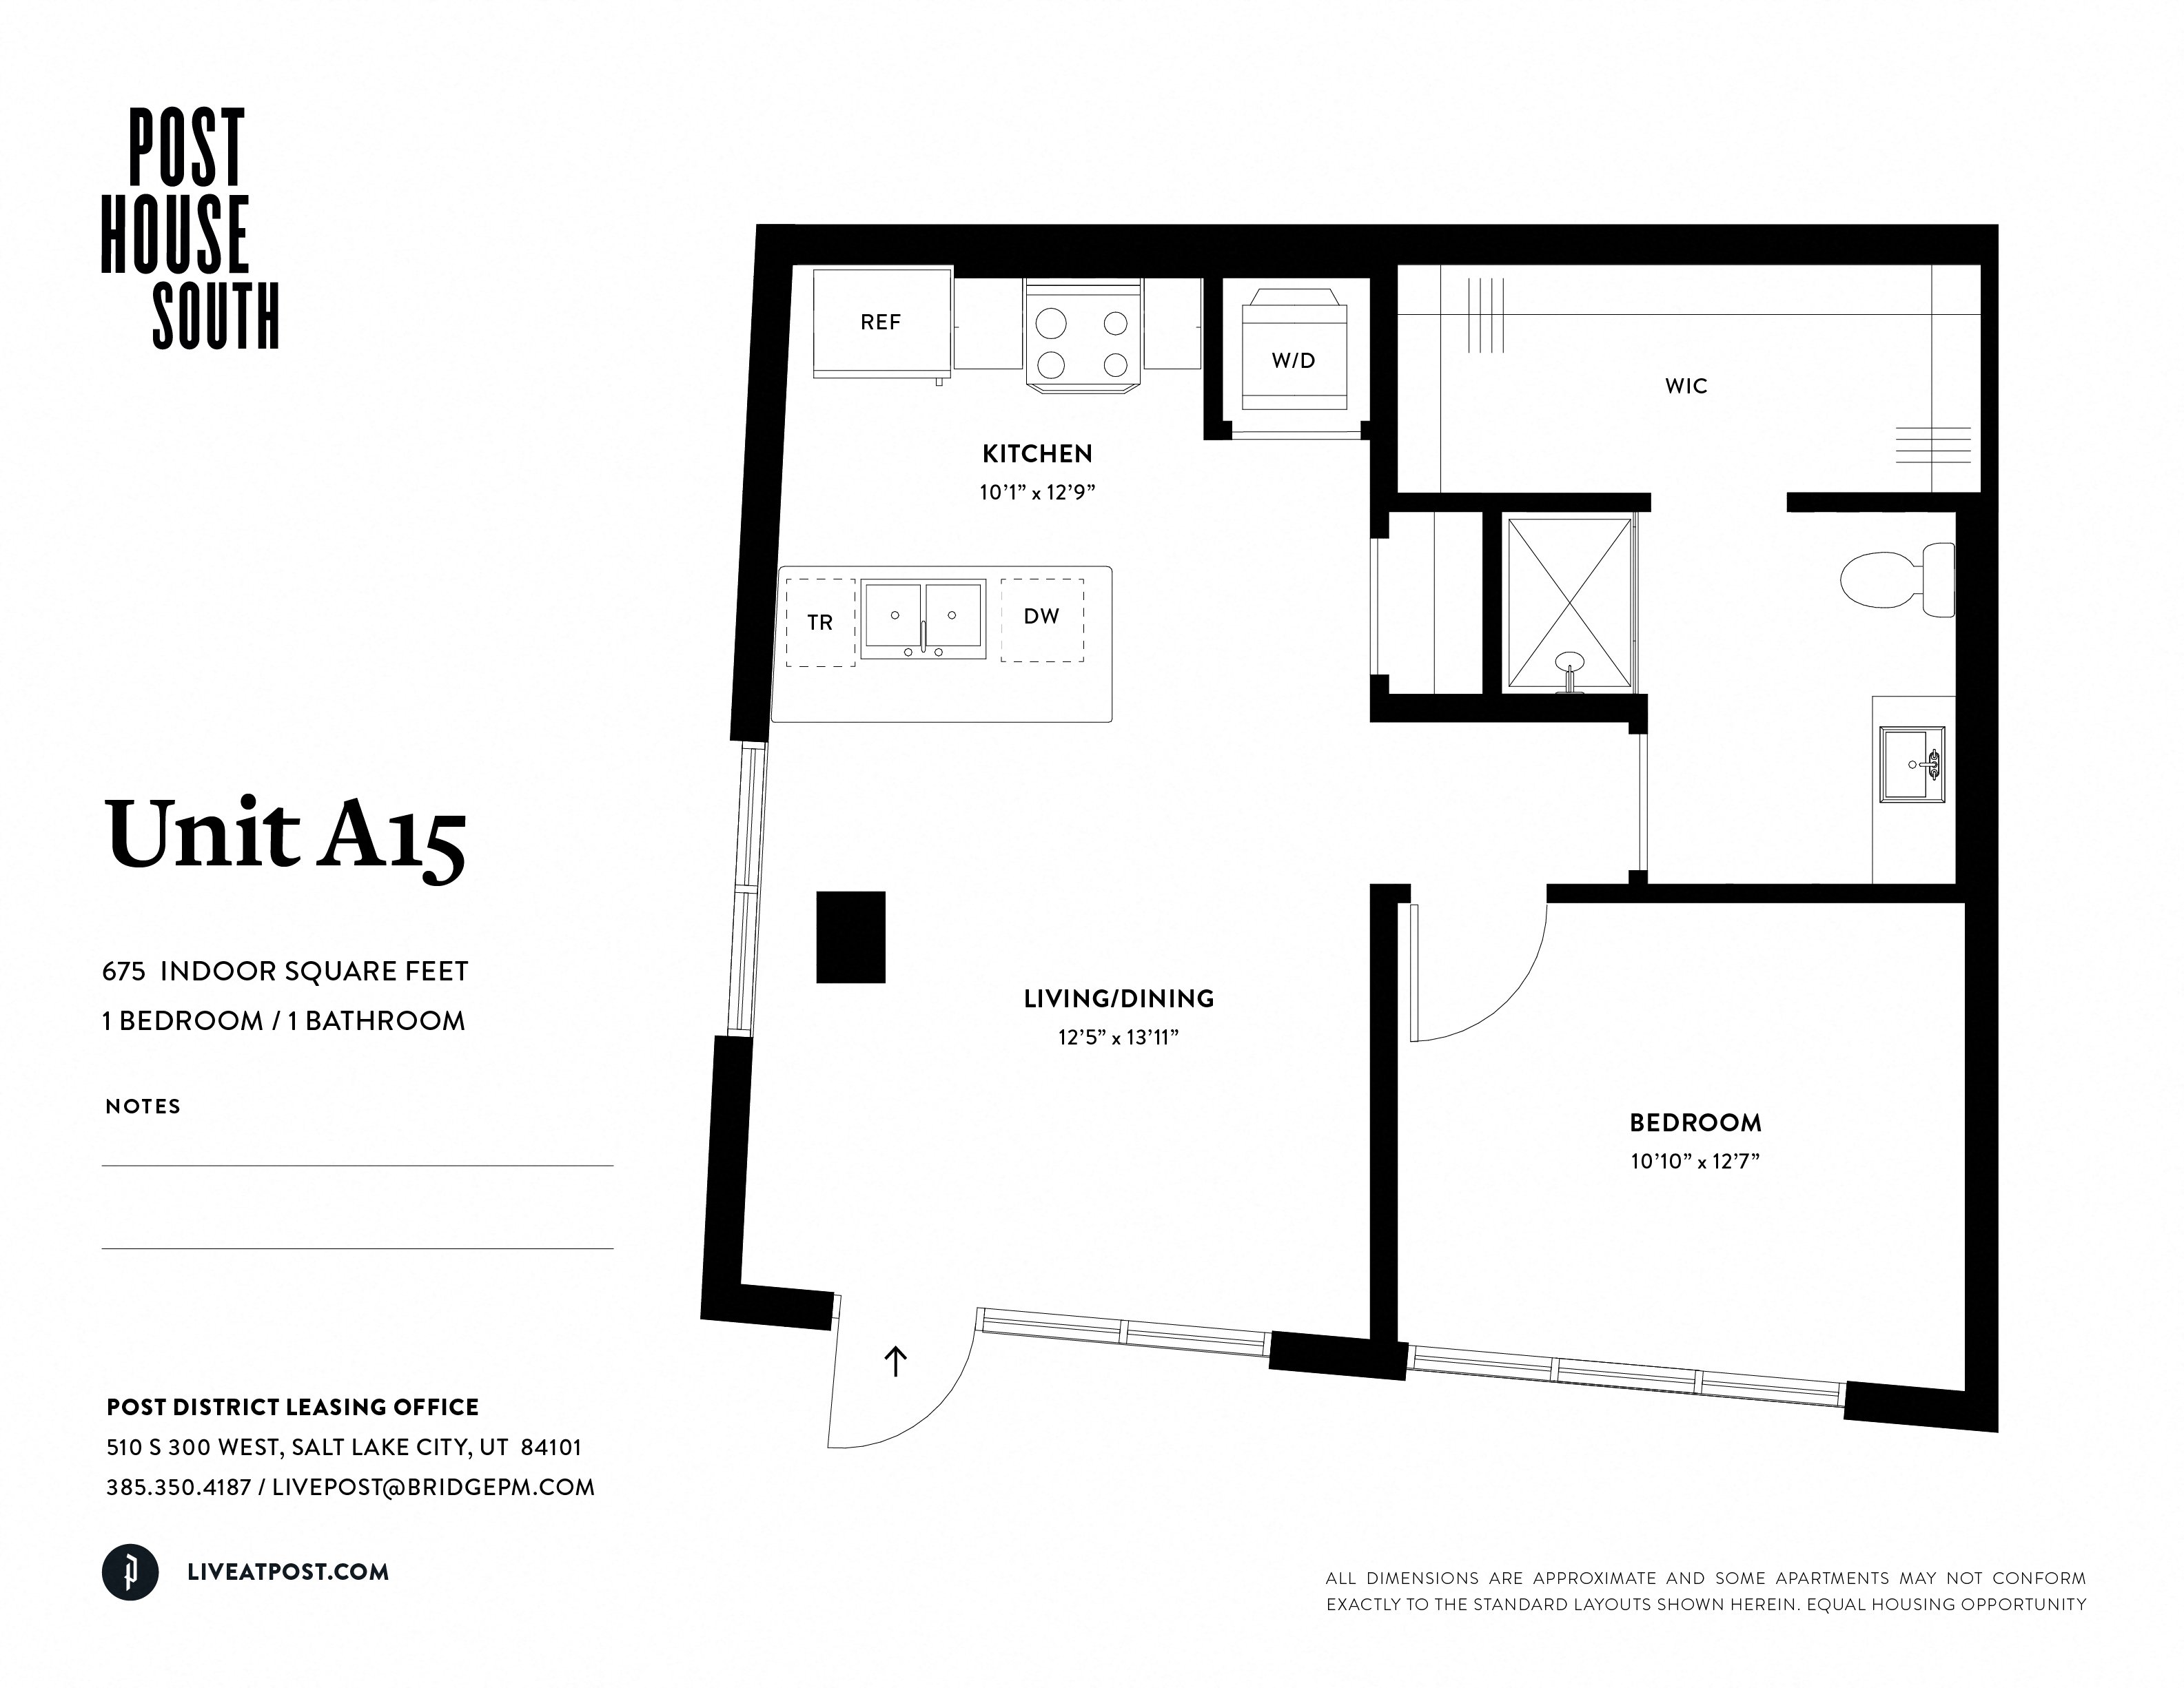 a floor plan of the post house south